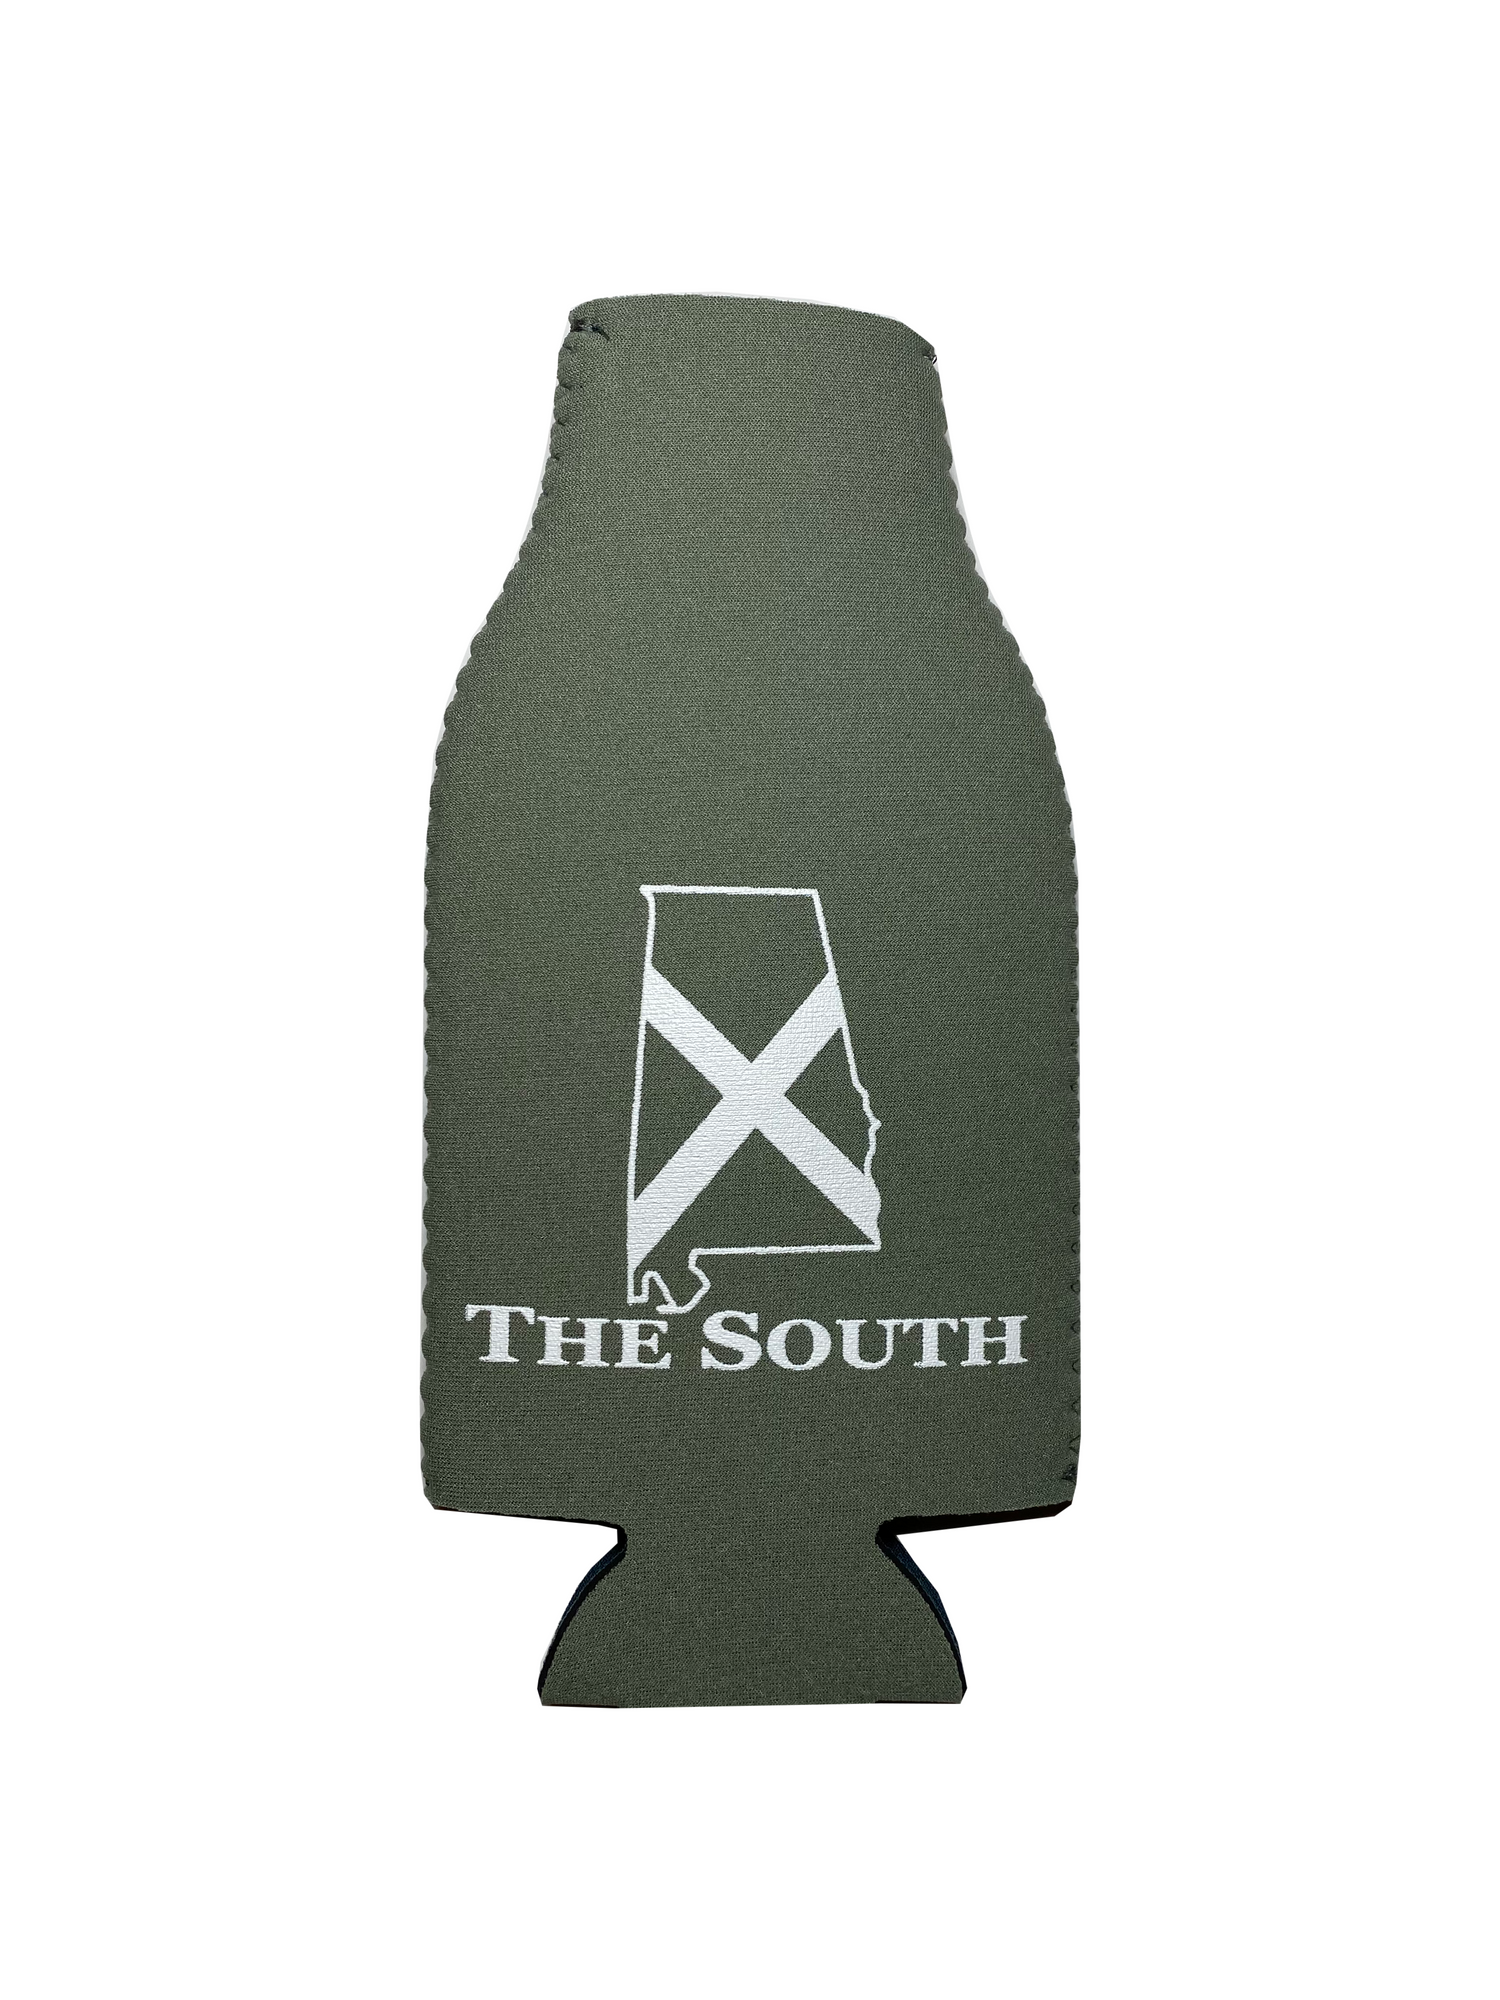 Bottle Koozie - The South